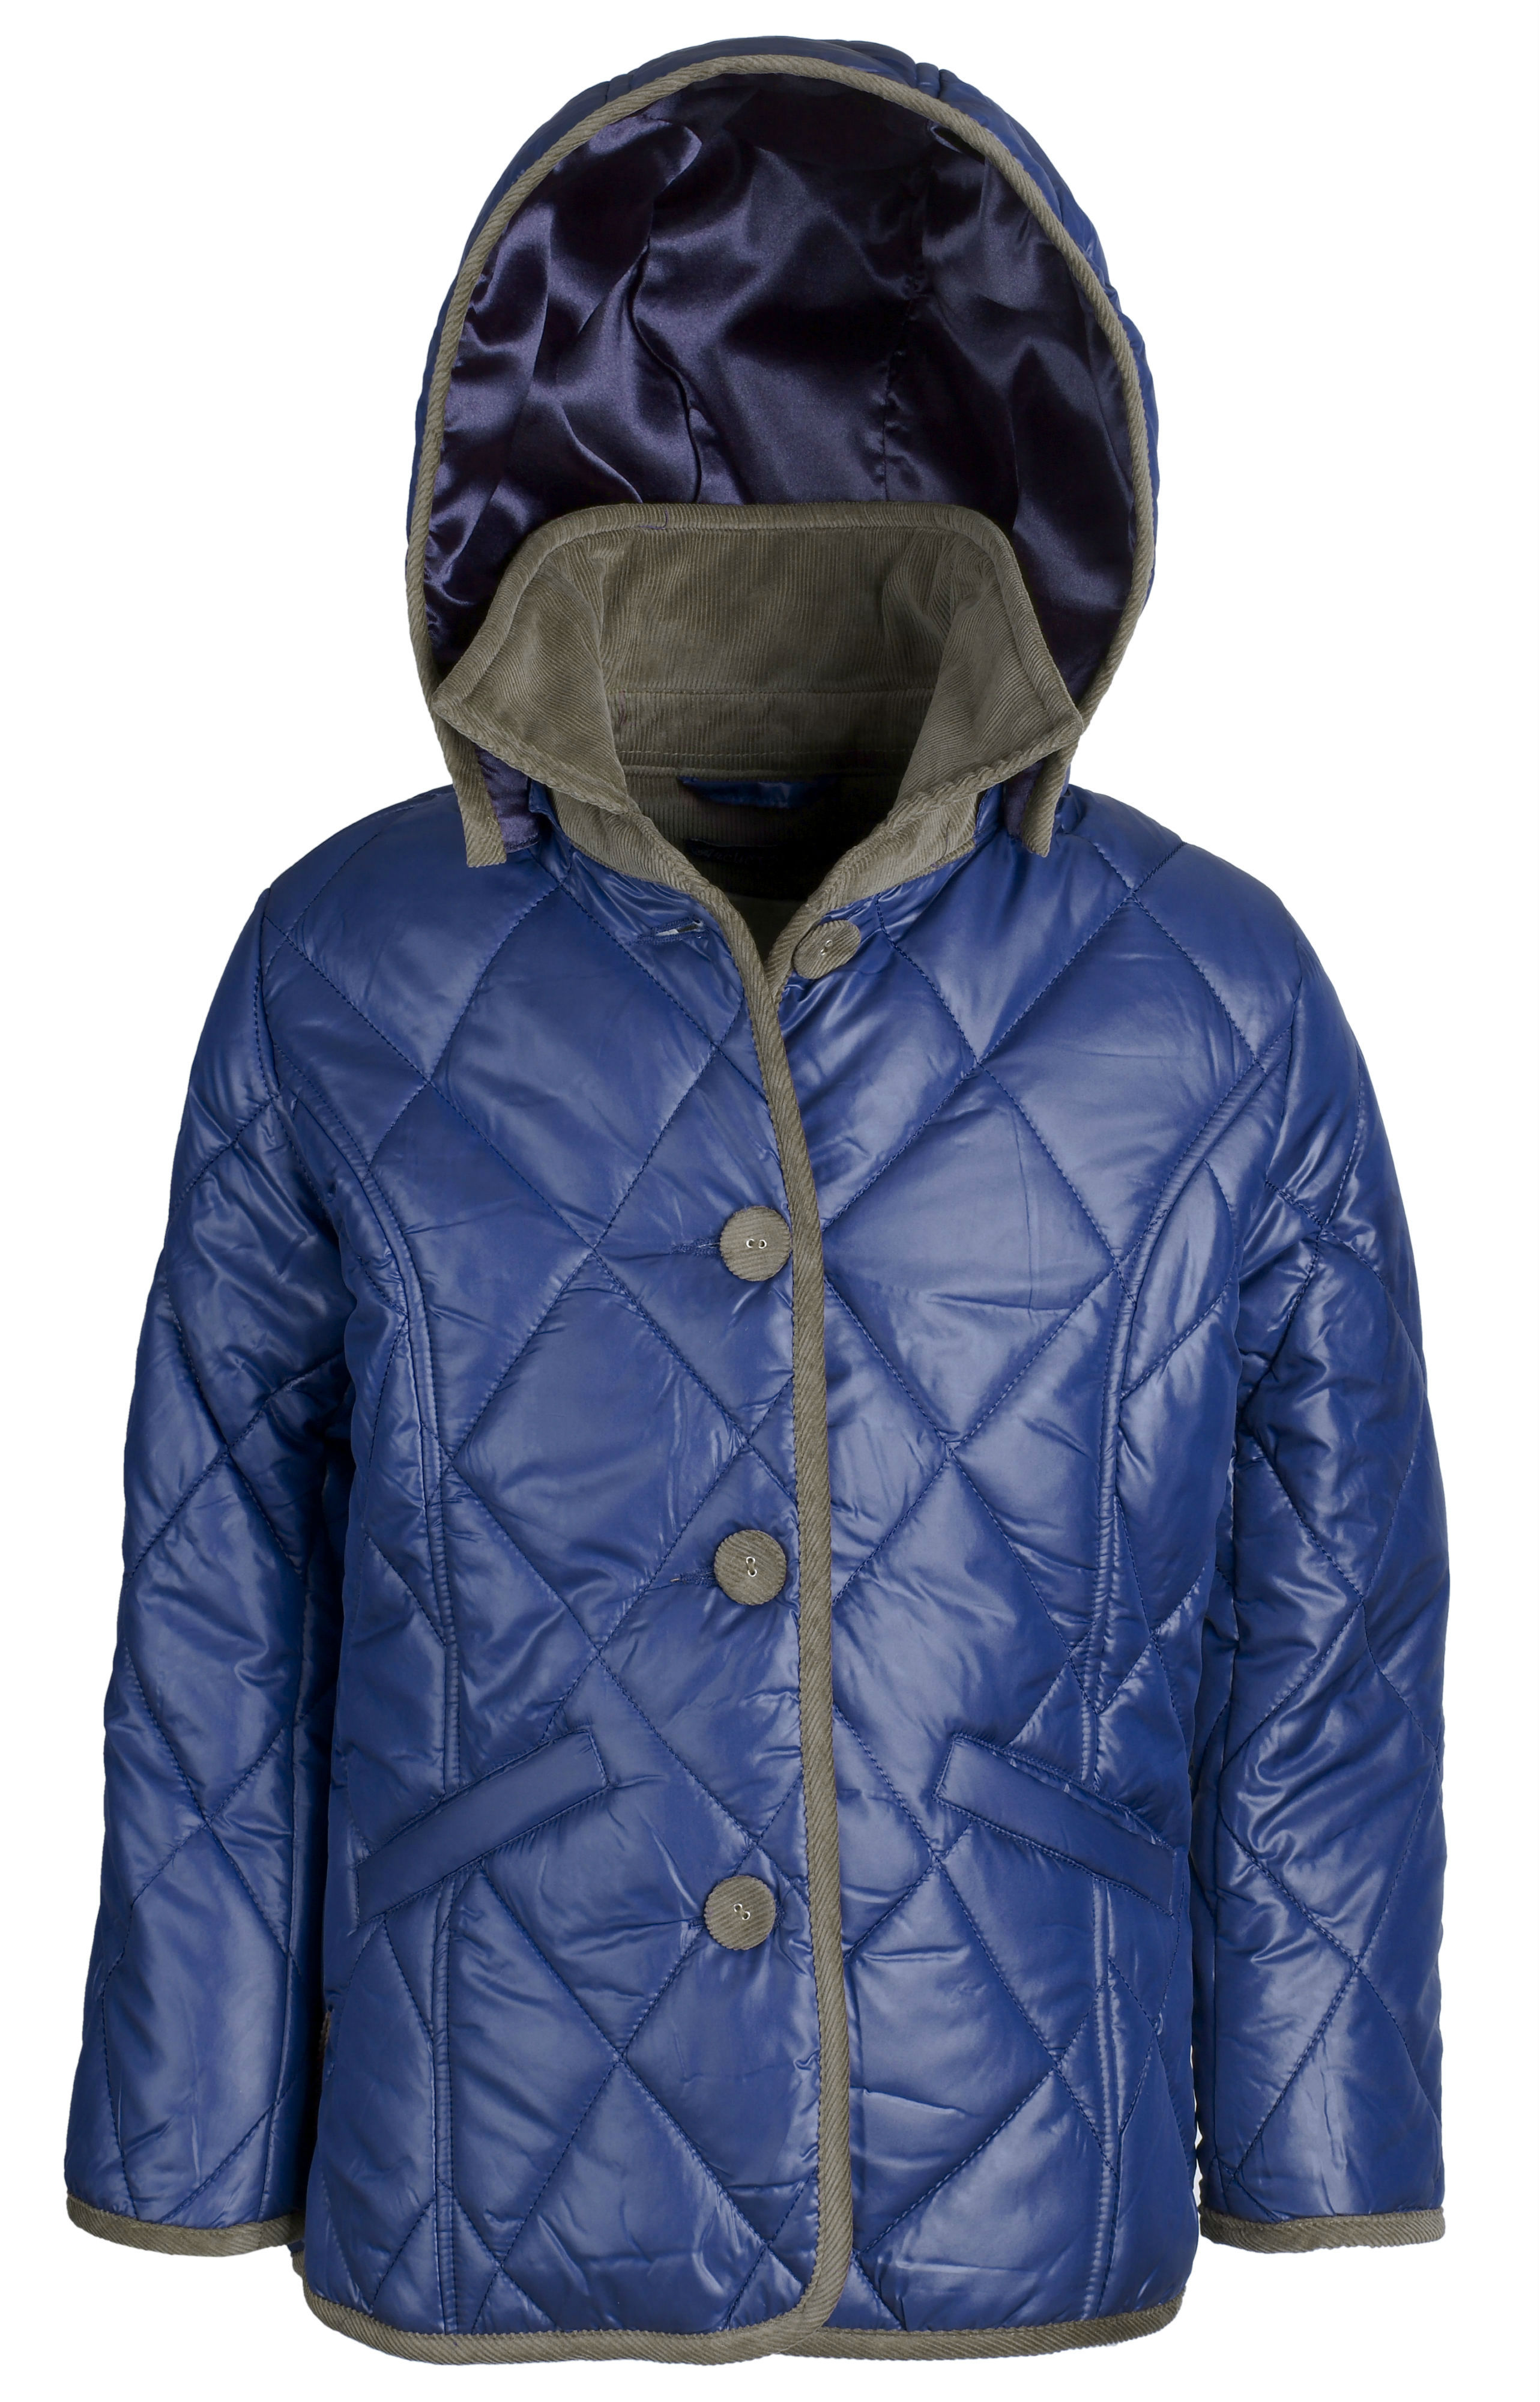 Arctic Circle Girls Padded Quilted Fall Winter Rain Trench Coat Jacket with Hood - image 1 of 4